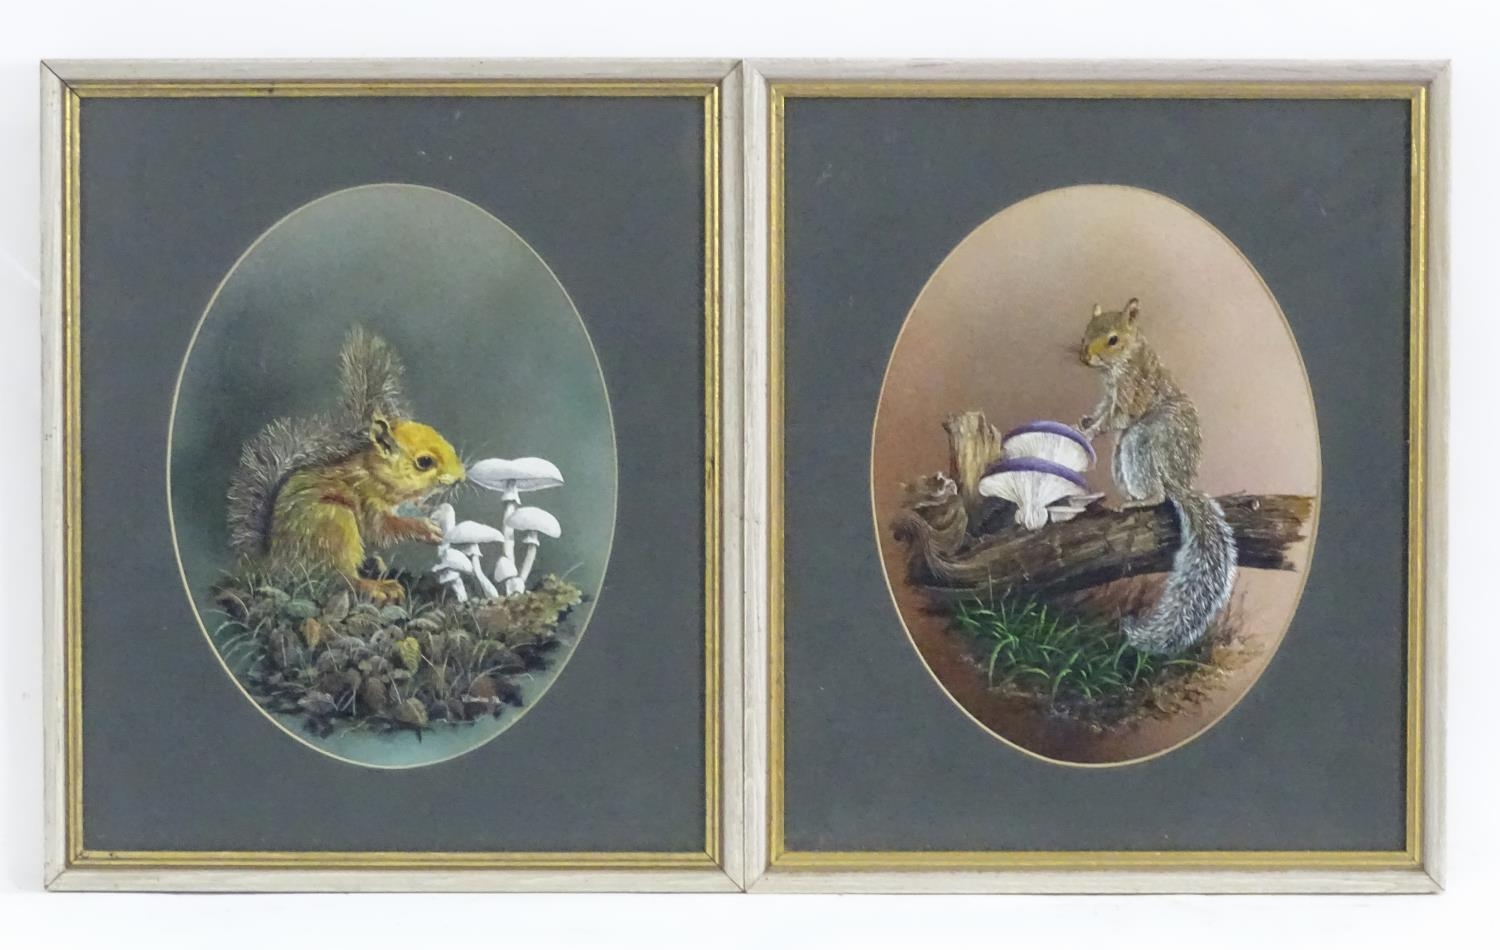 Nicholas, 20th century, Watercolour and gouache, A pair of oval portraits depicting squirrels, one